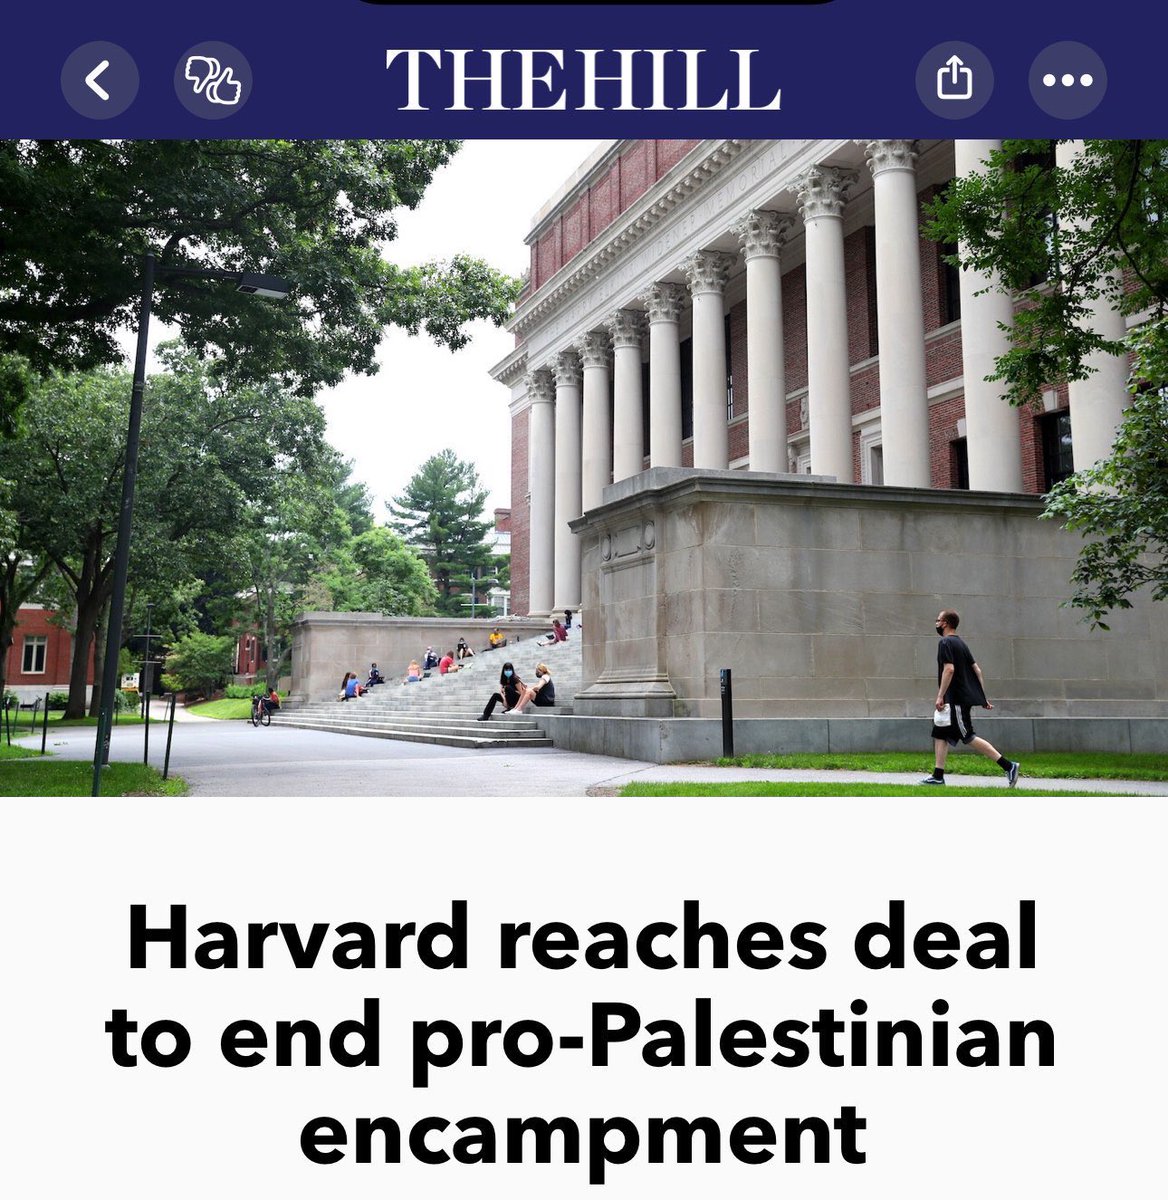 As an alumnus, I’m dismayed by Harvard’s pandering to the fringe and its willingness to tolerate the pervasive antisemitism. This is a moral and institutional failure.